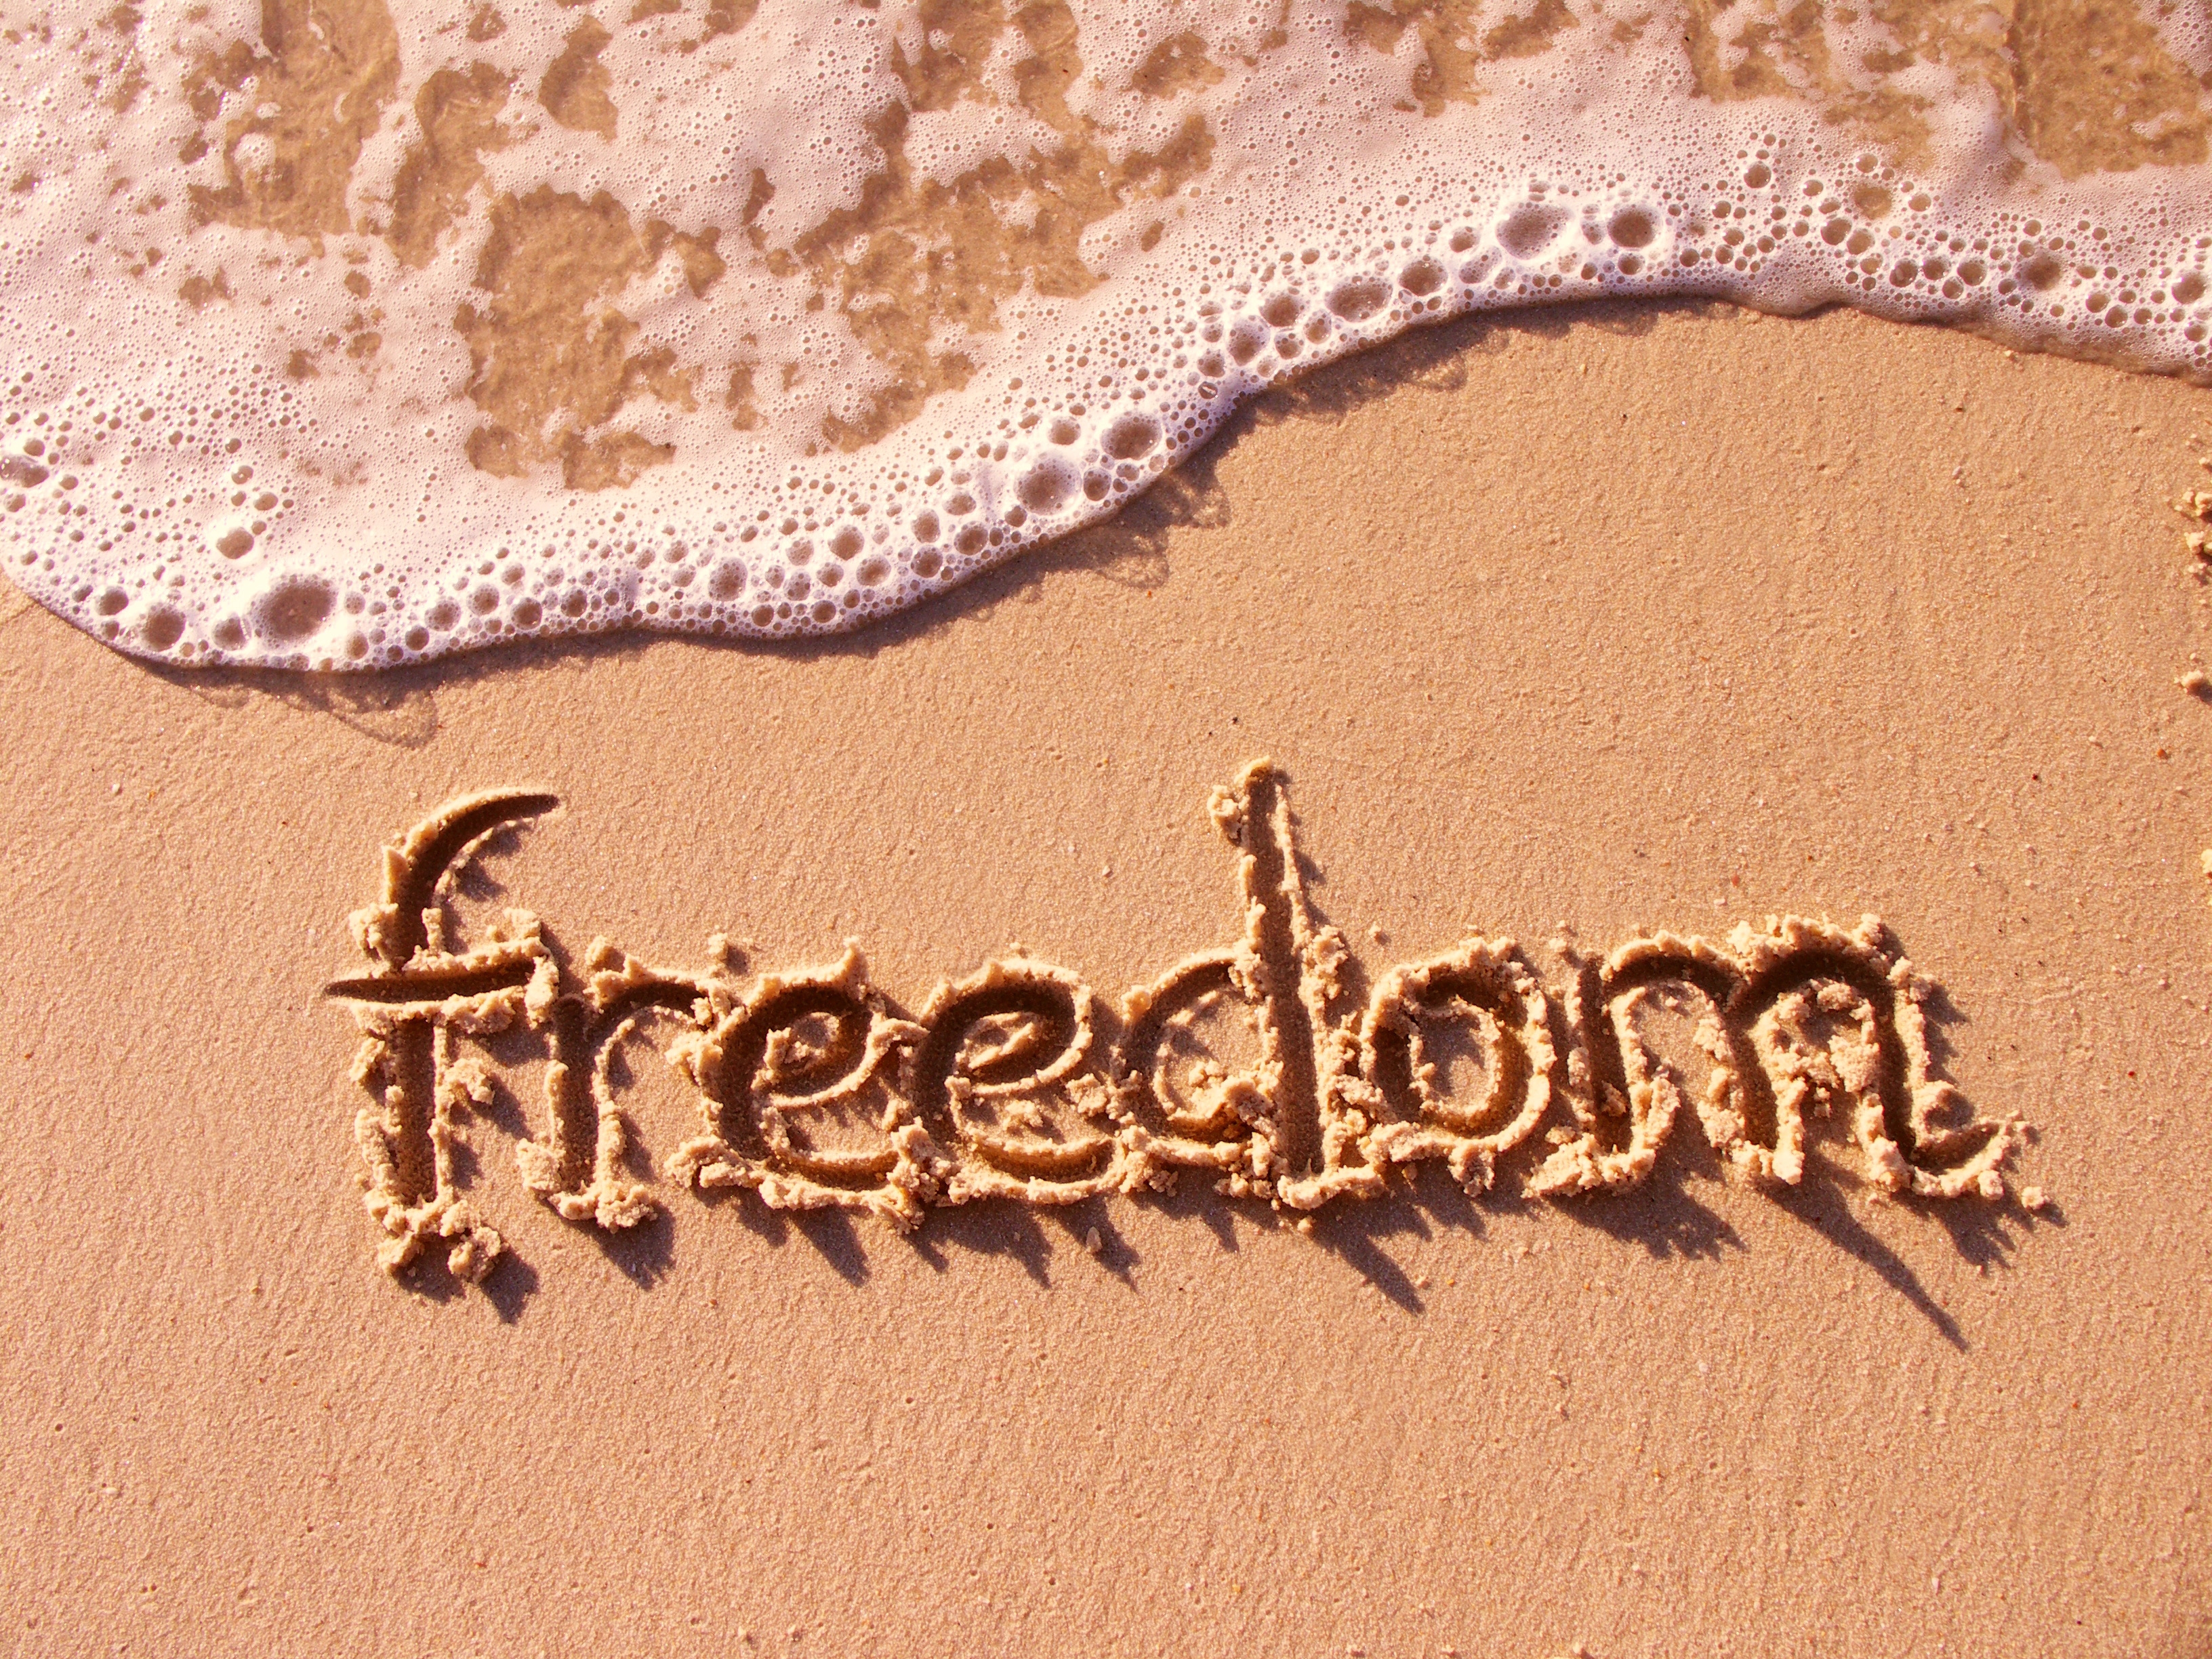 101783 download wallpaper words, inscription, water, sand, shore, bank, foam, freedom screensavers and pictures for free